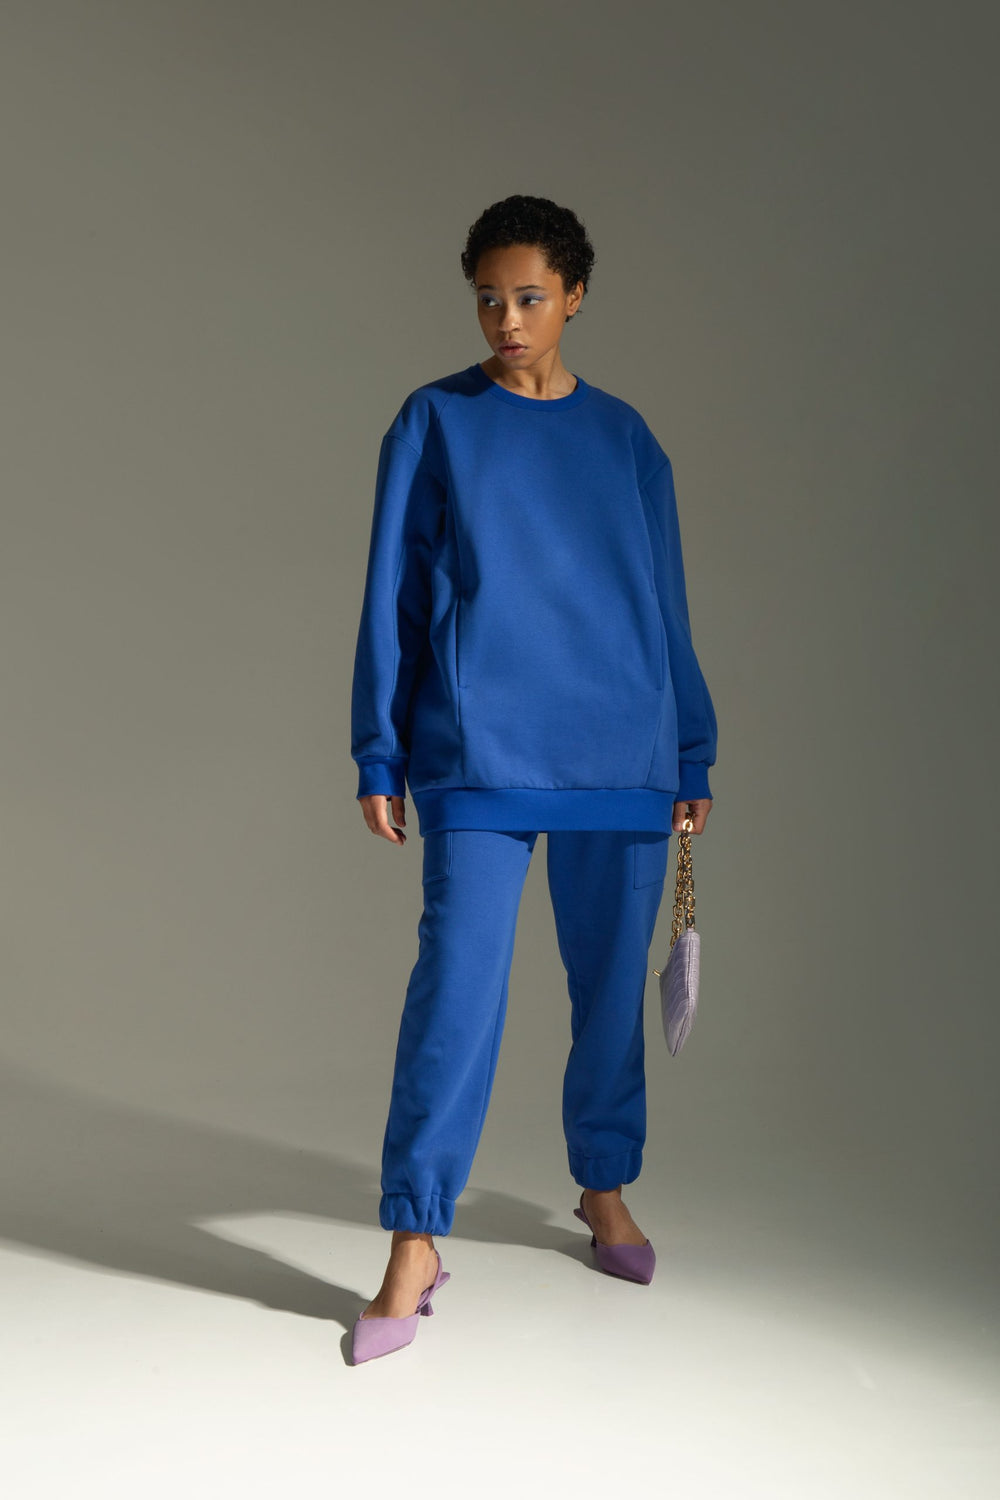 Woman wearing the Meg Sweatshirt sewing pattern from Vikisews on The Fold Line. A sweatshirt pattern made in sweatshirt fleece, thick french terry, or ponte di roma fabrics, featuring an oversized straight-cut, princess seams, side pockets, dropped should